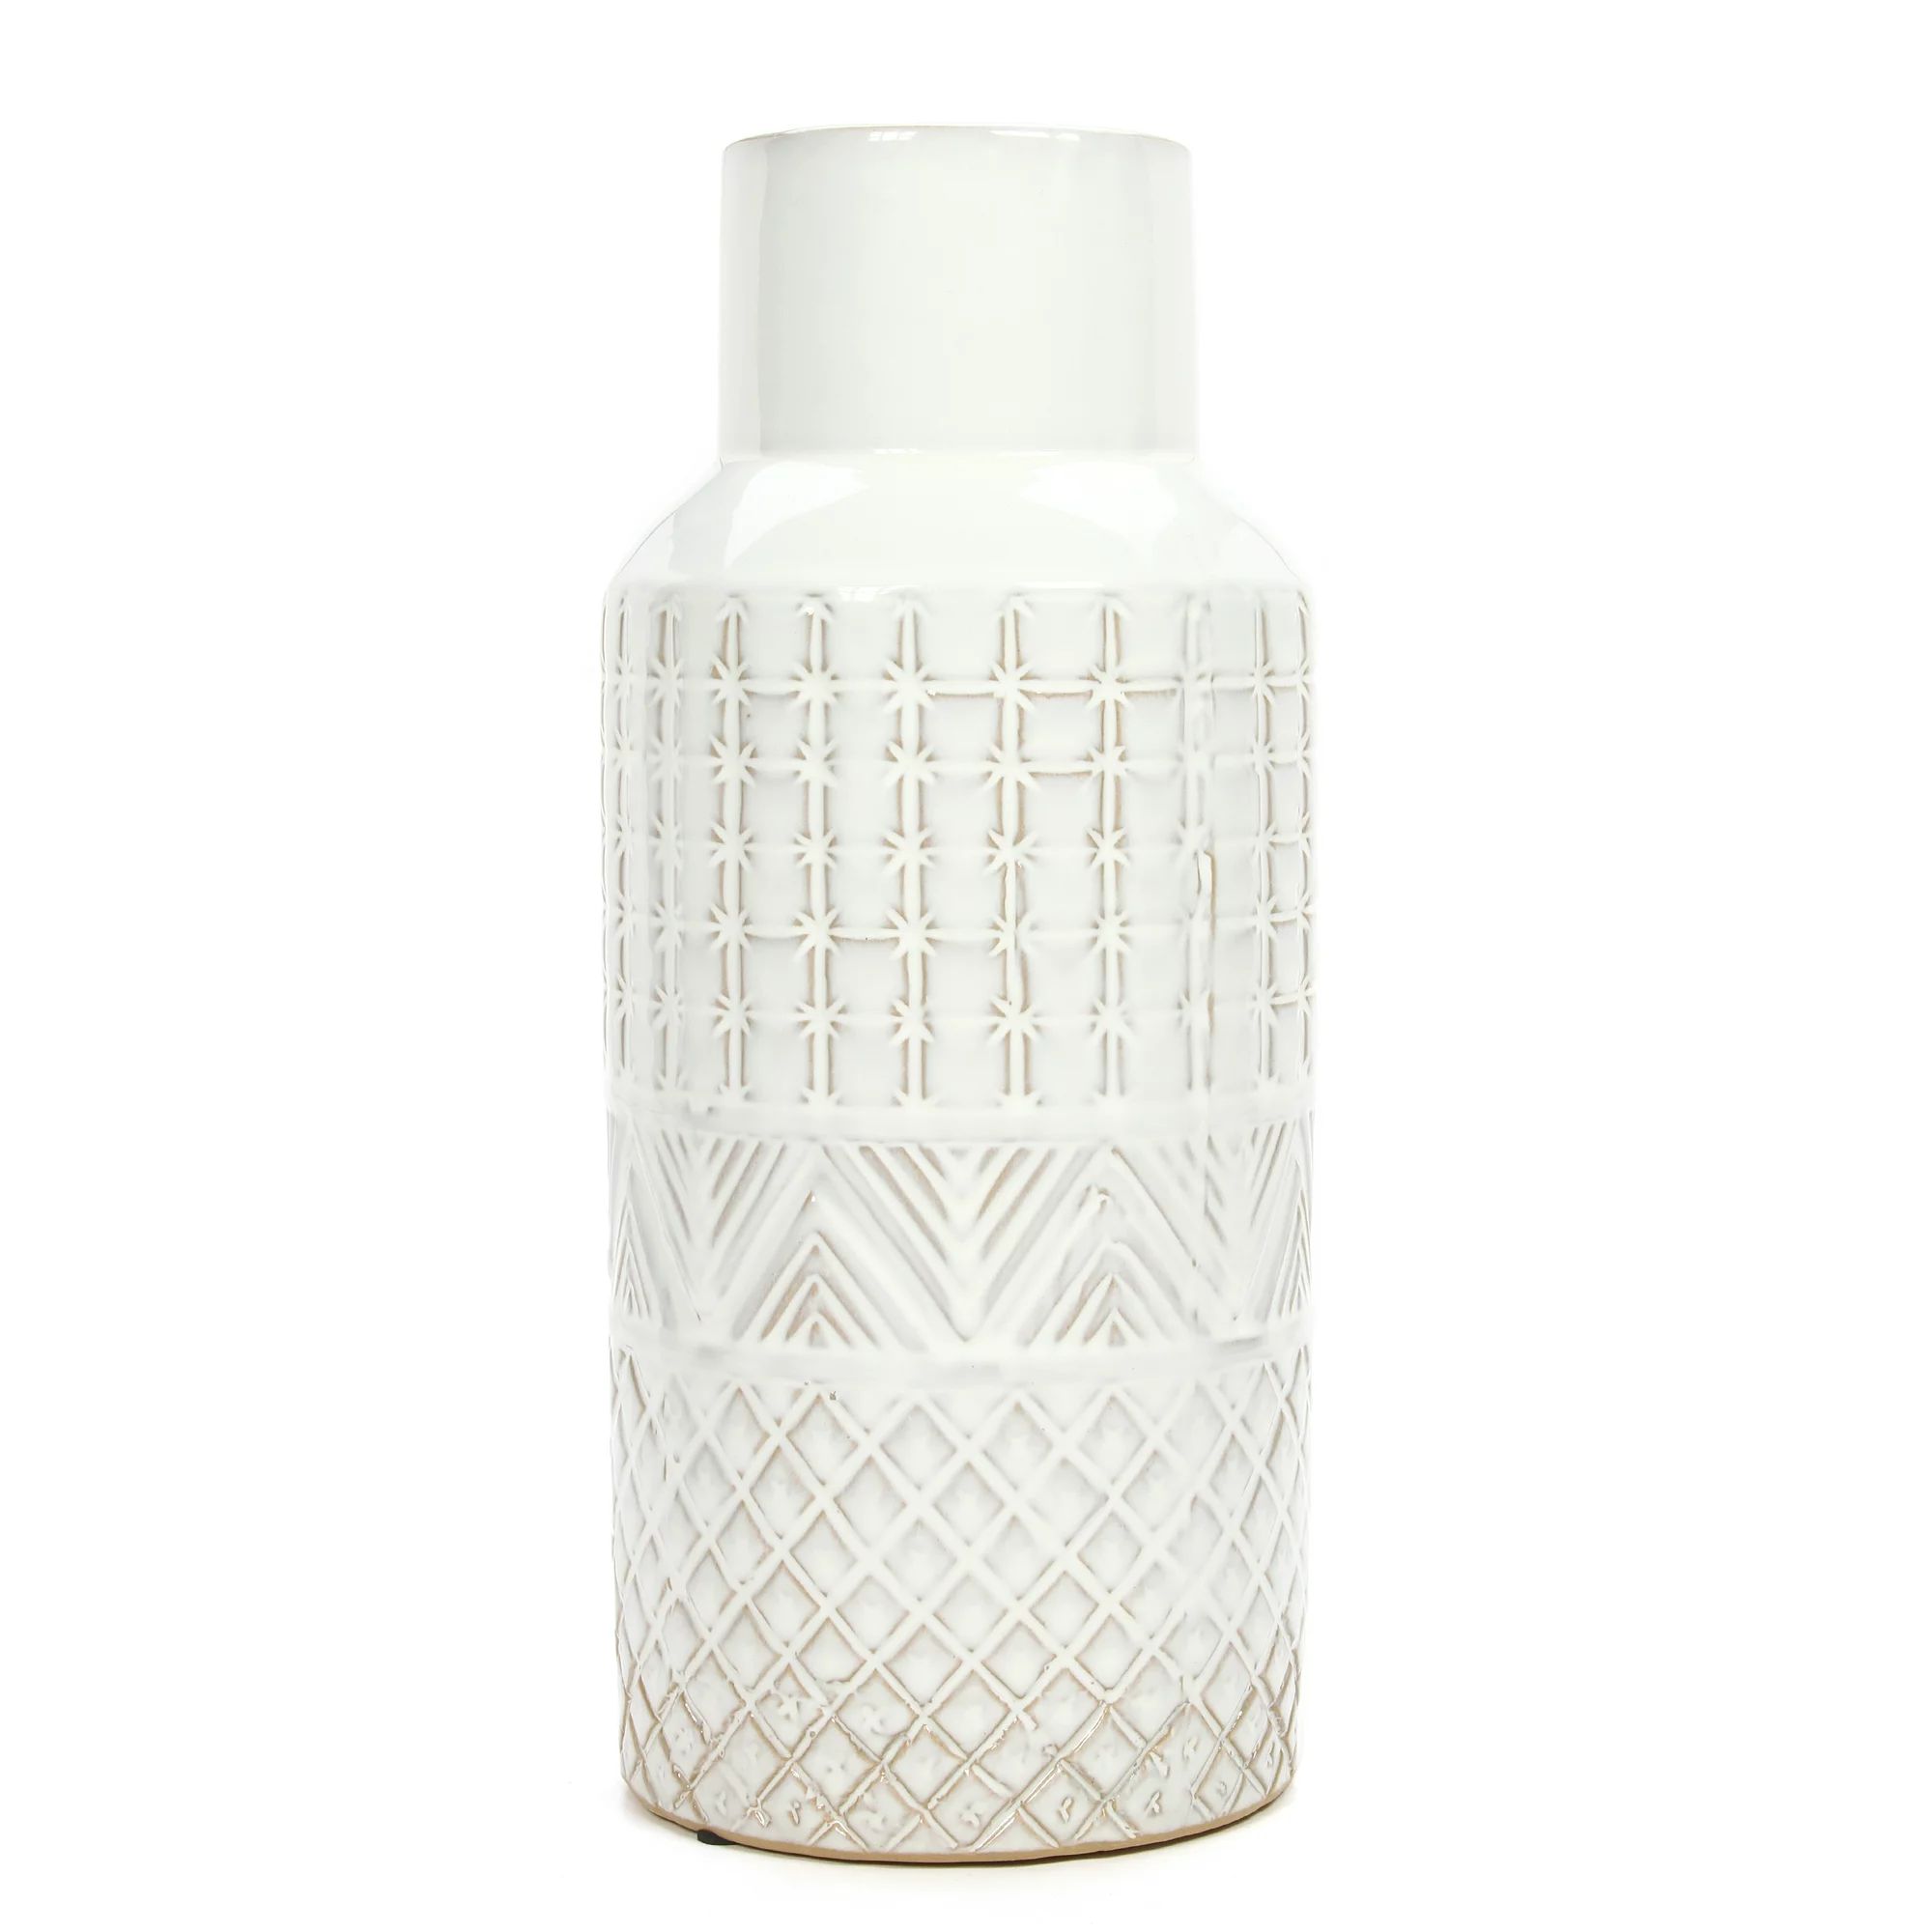 Better Homes and Gardens Large Cream Textured Vase | Walmart (US)